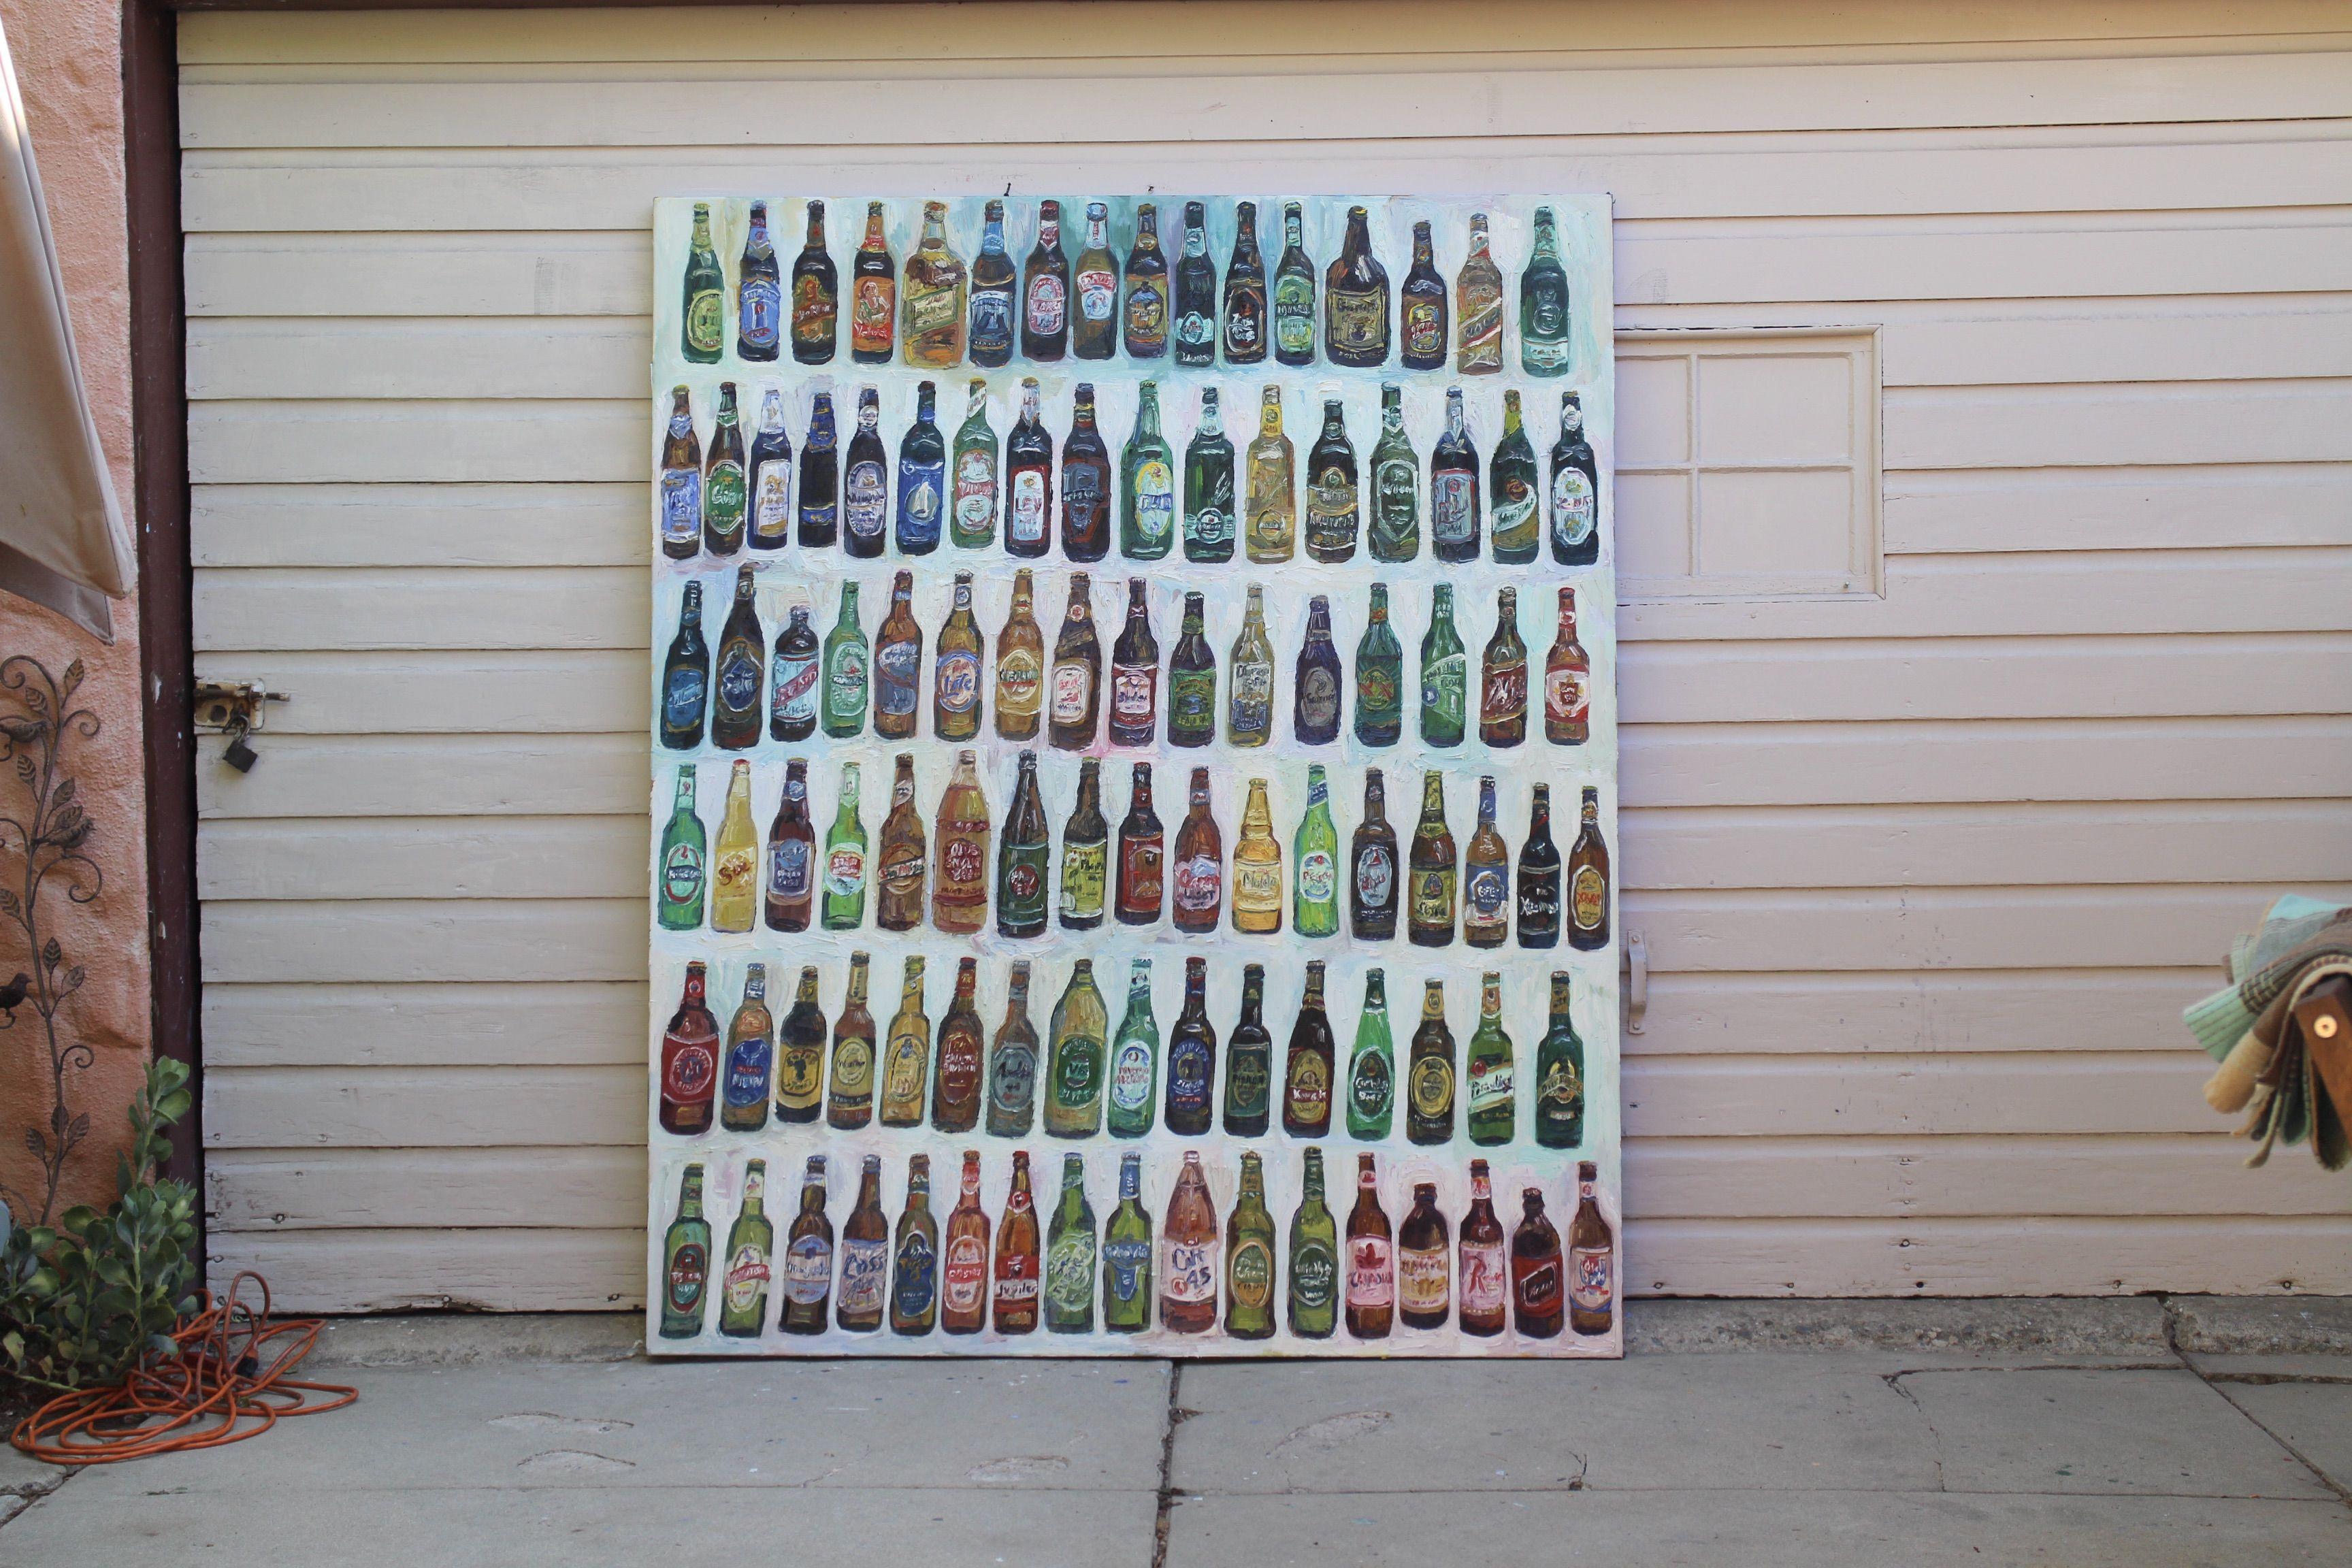 99 bottles of beer on the wall, Painting, Oil on Canvas 1